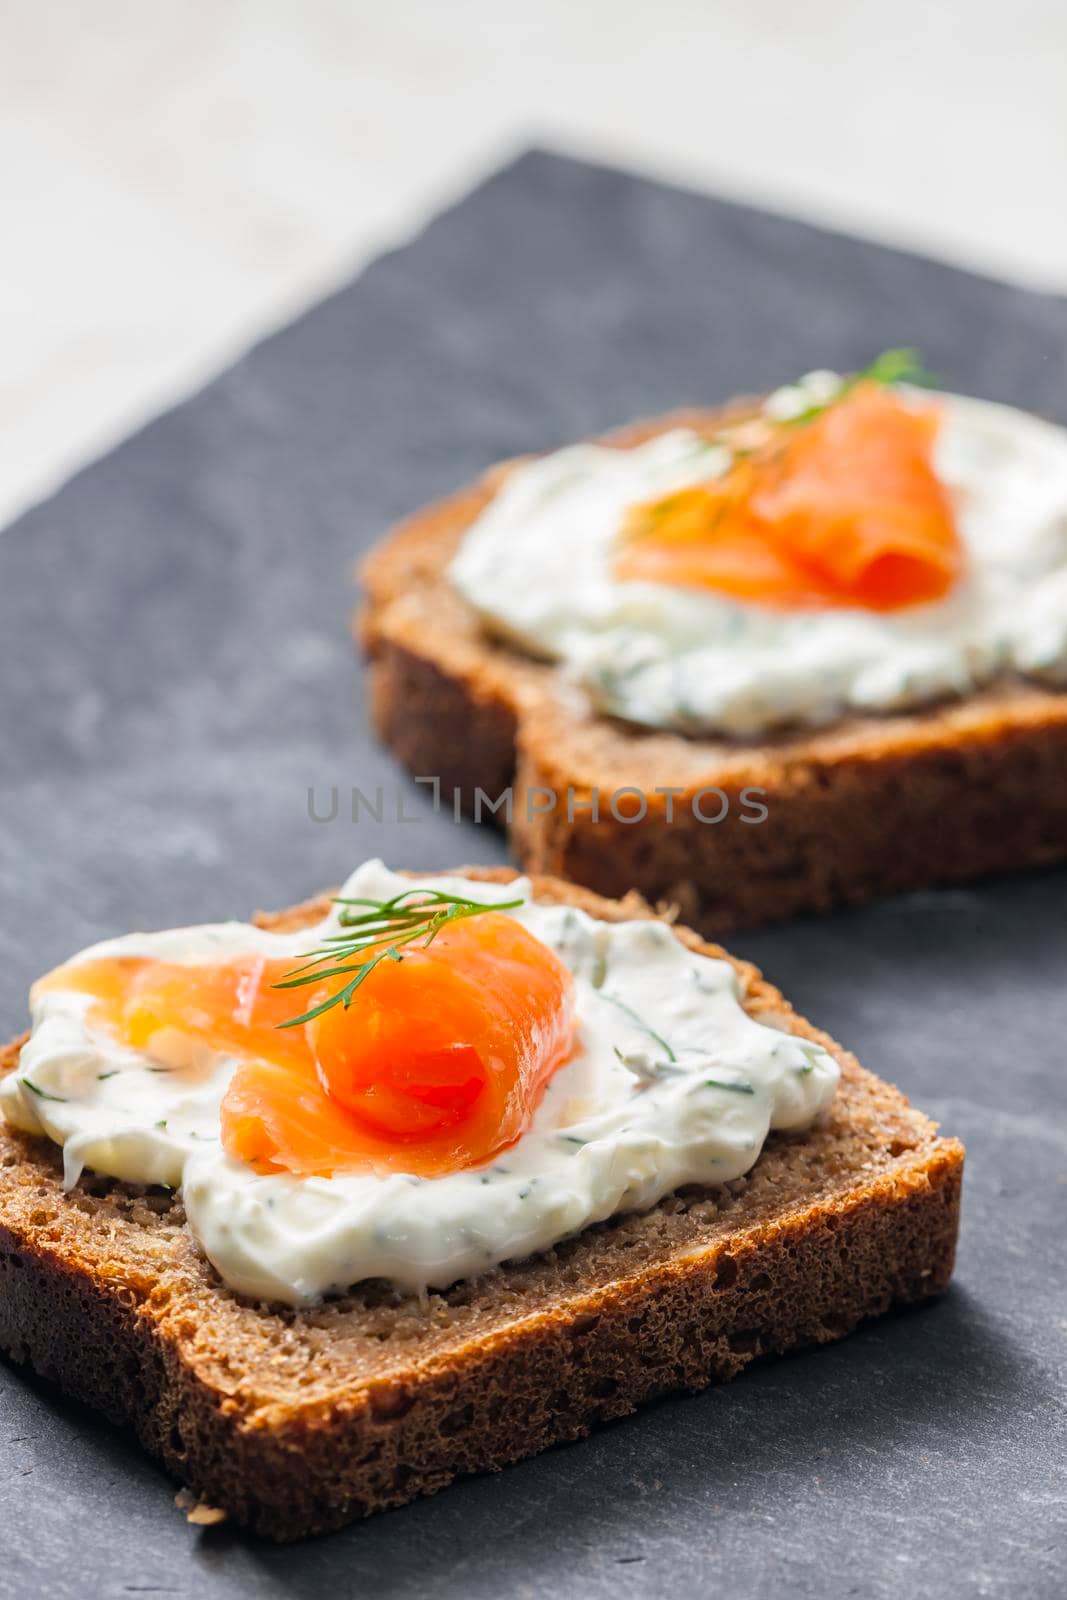 whole grain bread with dill spread and smoked salmon by phbcz